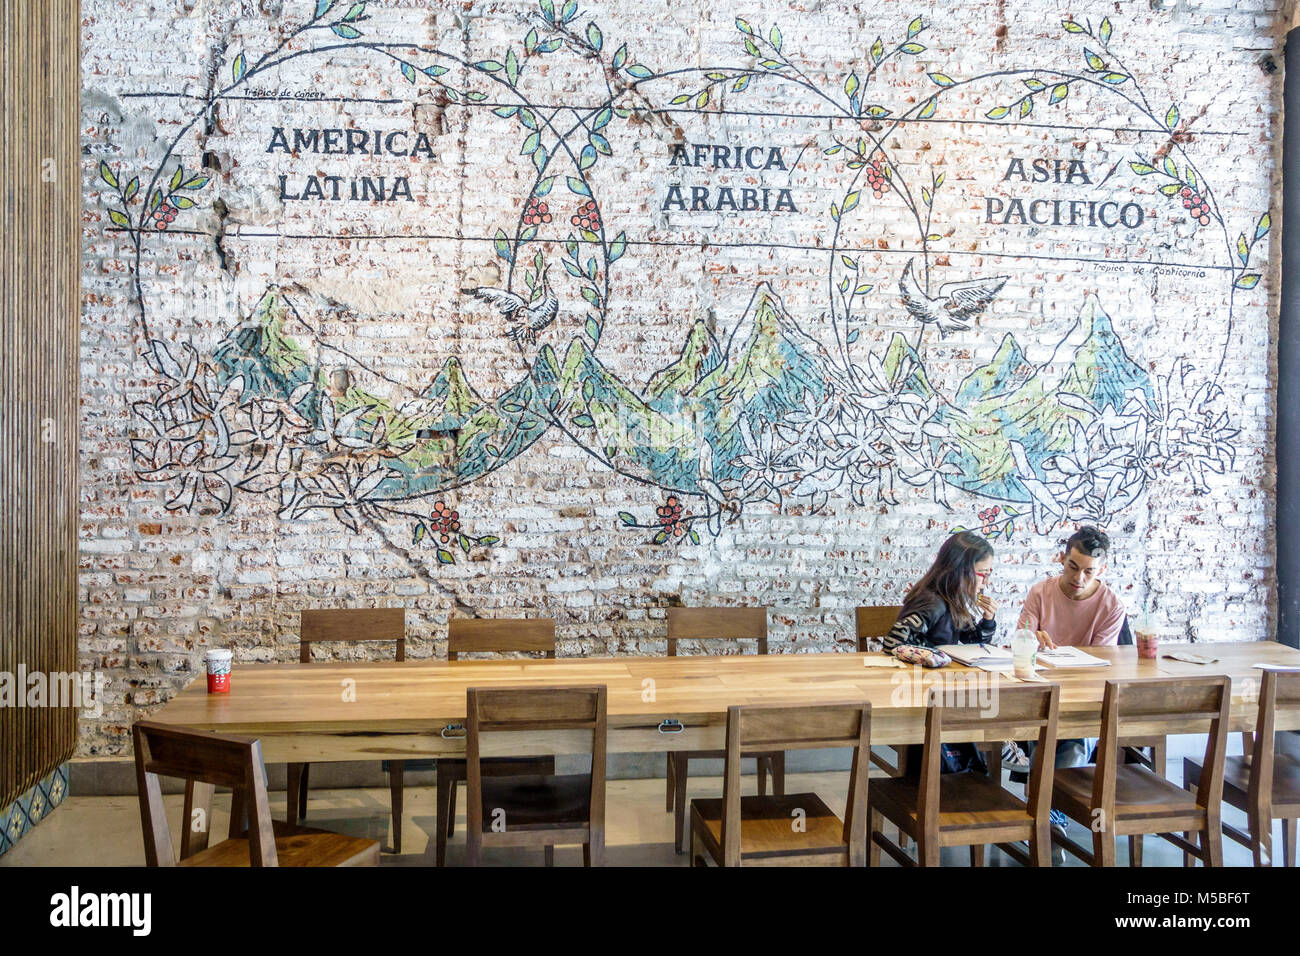 Buenos Aires Argentina,Galerias Pacifico,shopping mall,interior inside,Starbucks Coffee,cafe,coffeehouse,wall mural,exposed brick,table,man men male,w Stock Photo